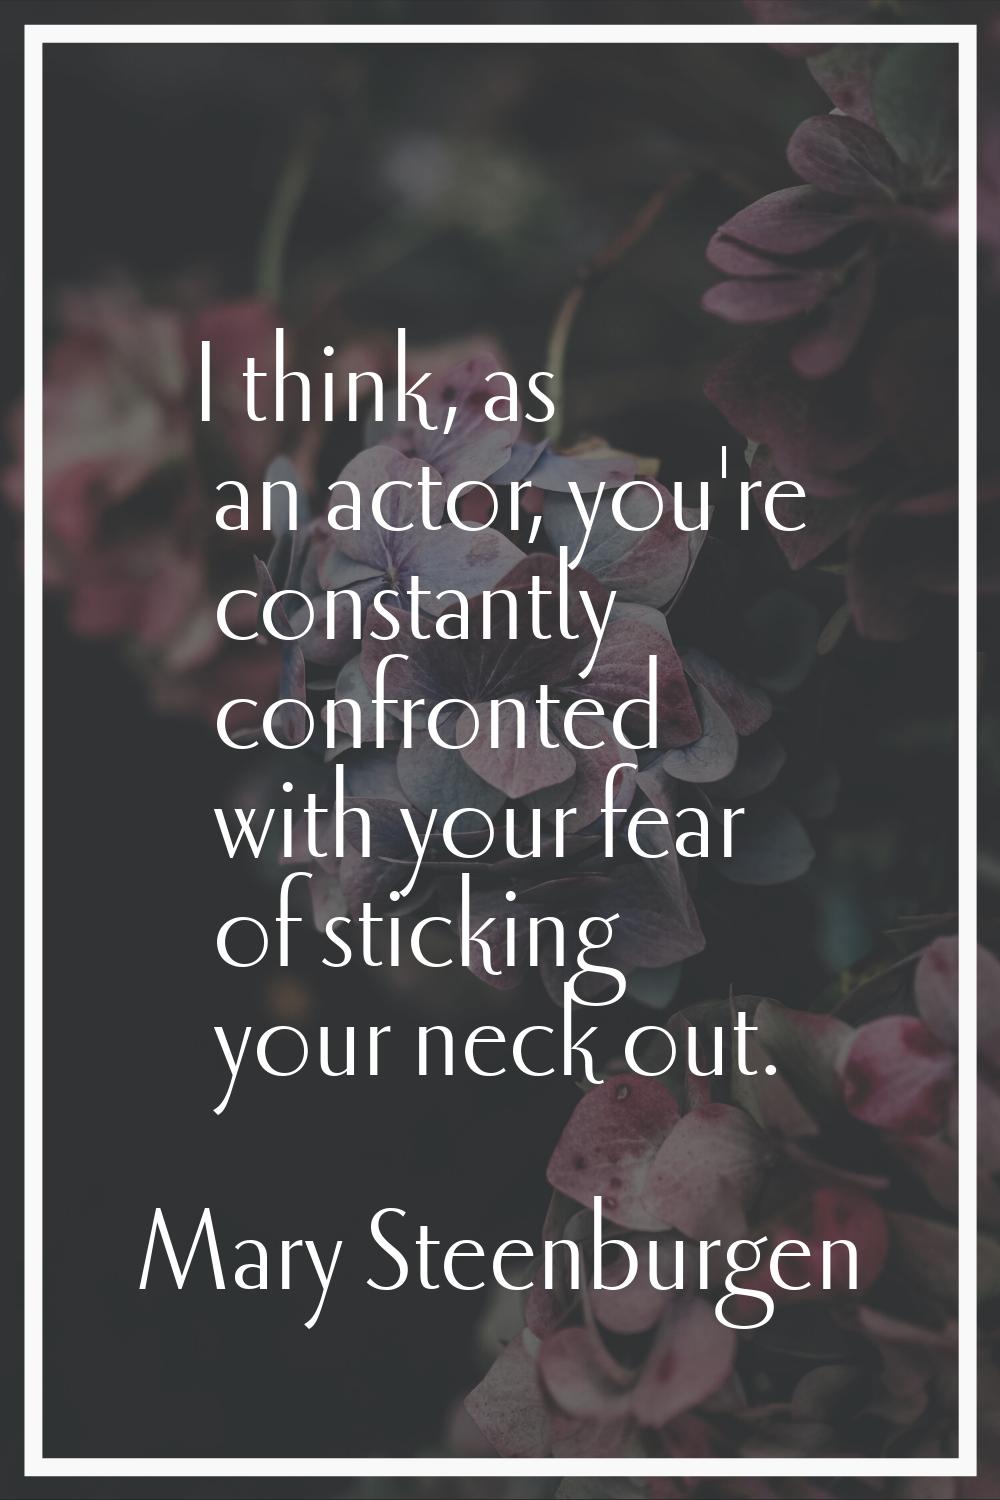 I think, as an actor, you're constantly confronted with your fear of sticking your neck out.